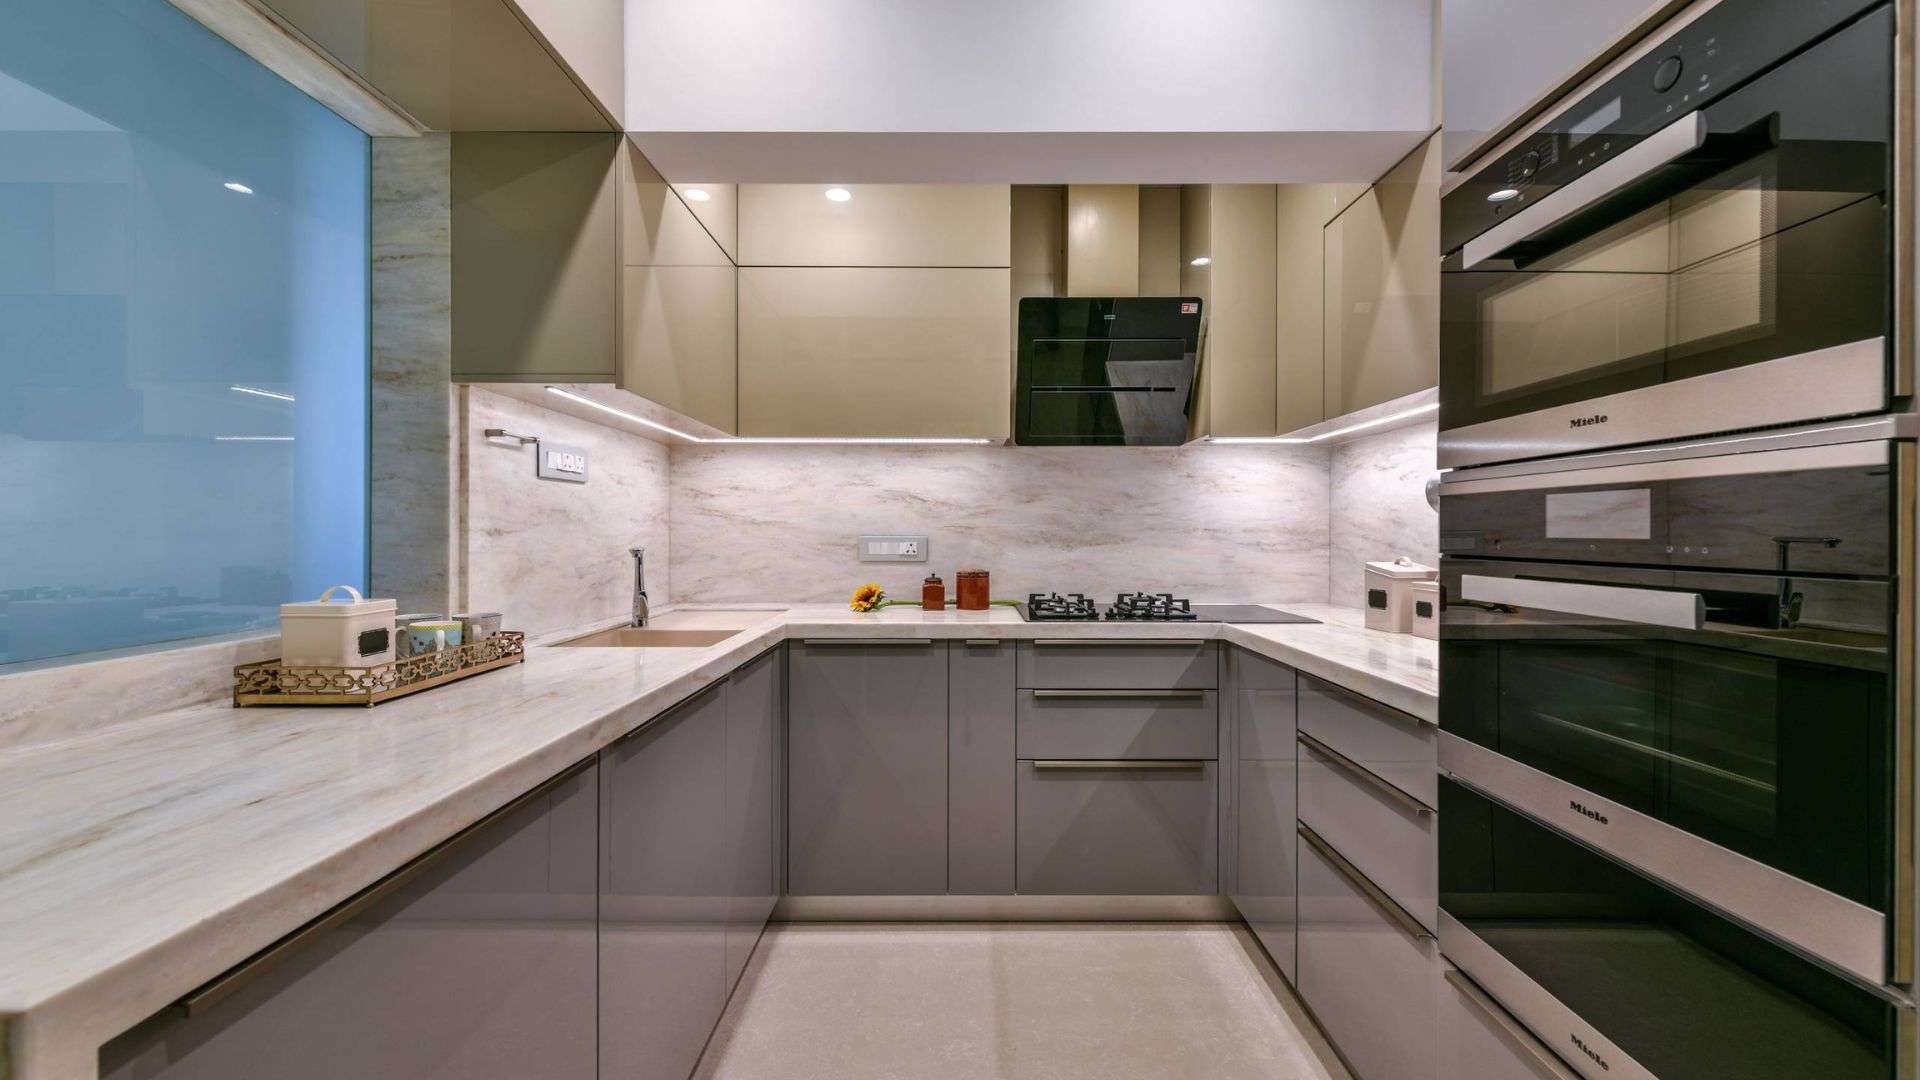 Upgrade Your Home with Lira Kitchen’s Modular Designs